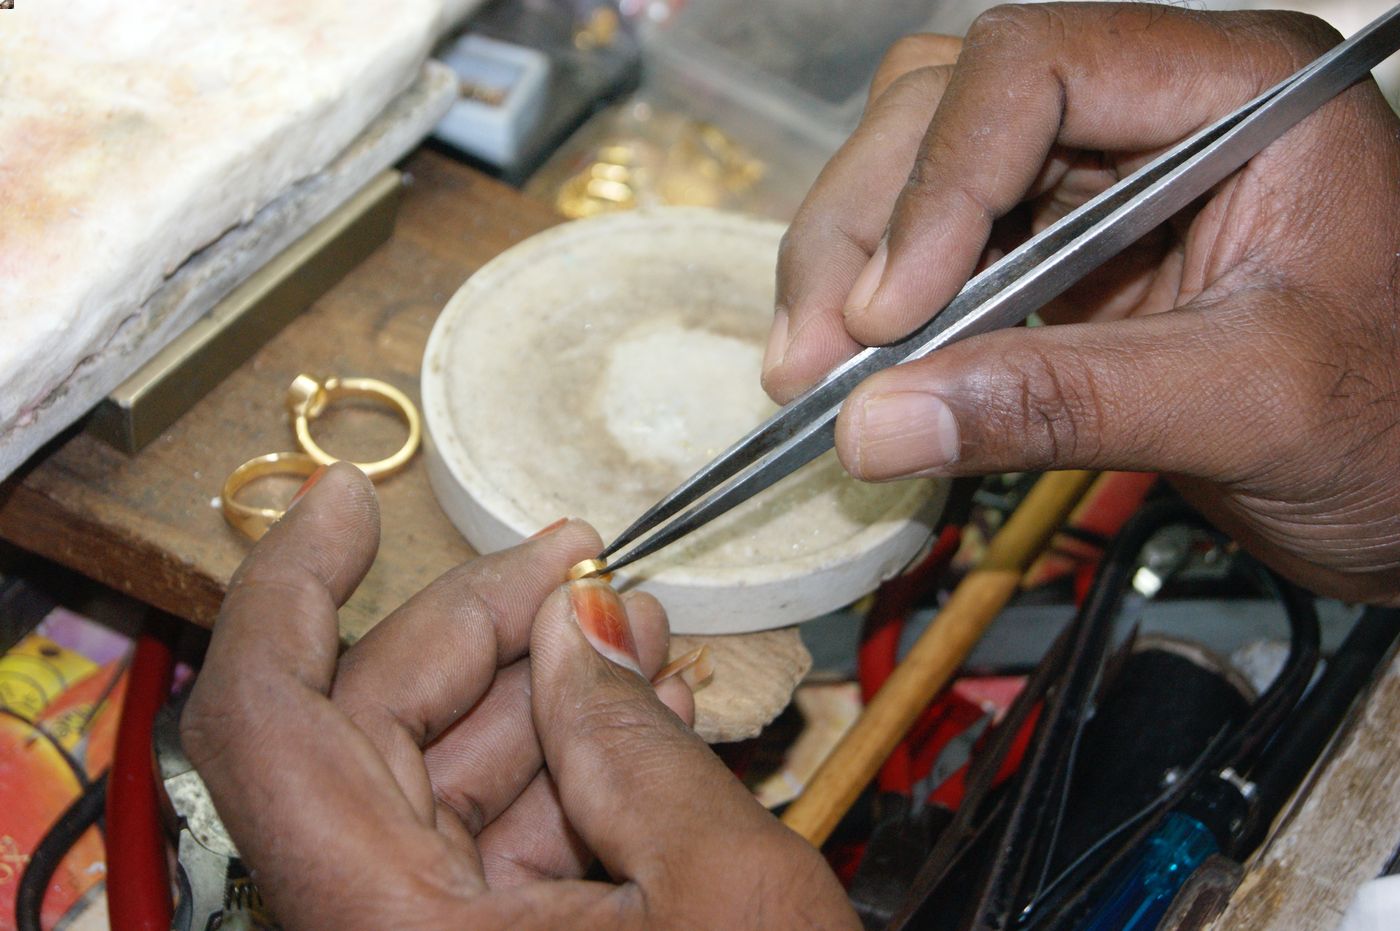 A goldsmith has an individual workstation, and uses tools such as files, hammers, and tweezers to shape and carve gold into jewellery. He usually offers other services as well, such as the repair, alteration, cleaning, and polishing of jewellery.